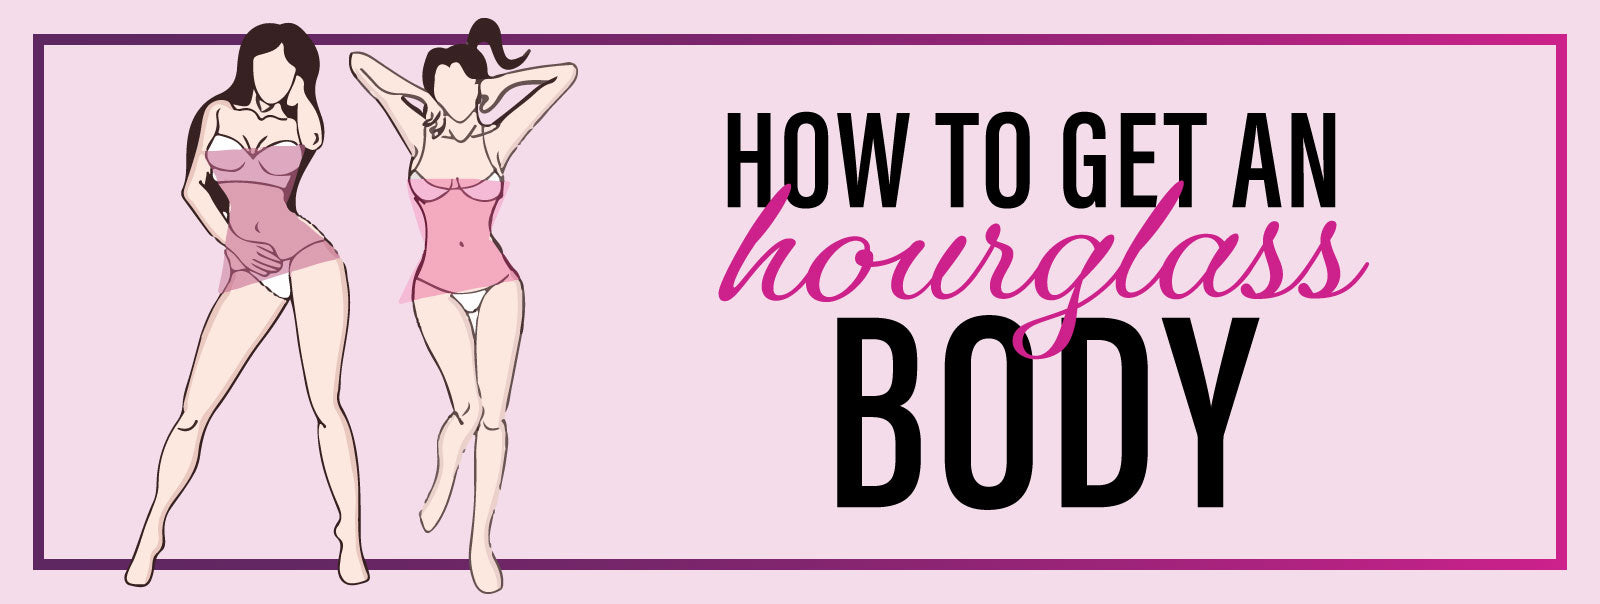 How To Get An Hourglass Body